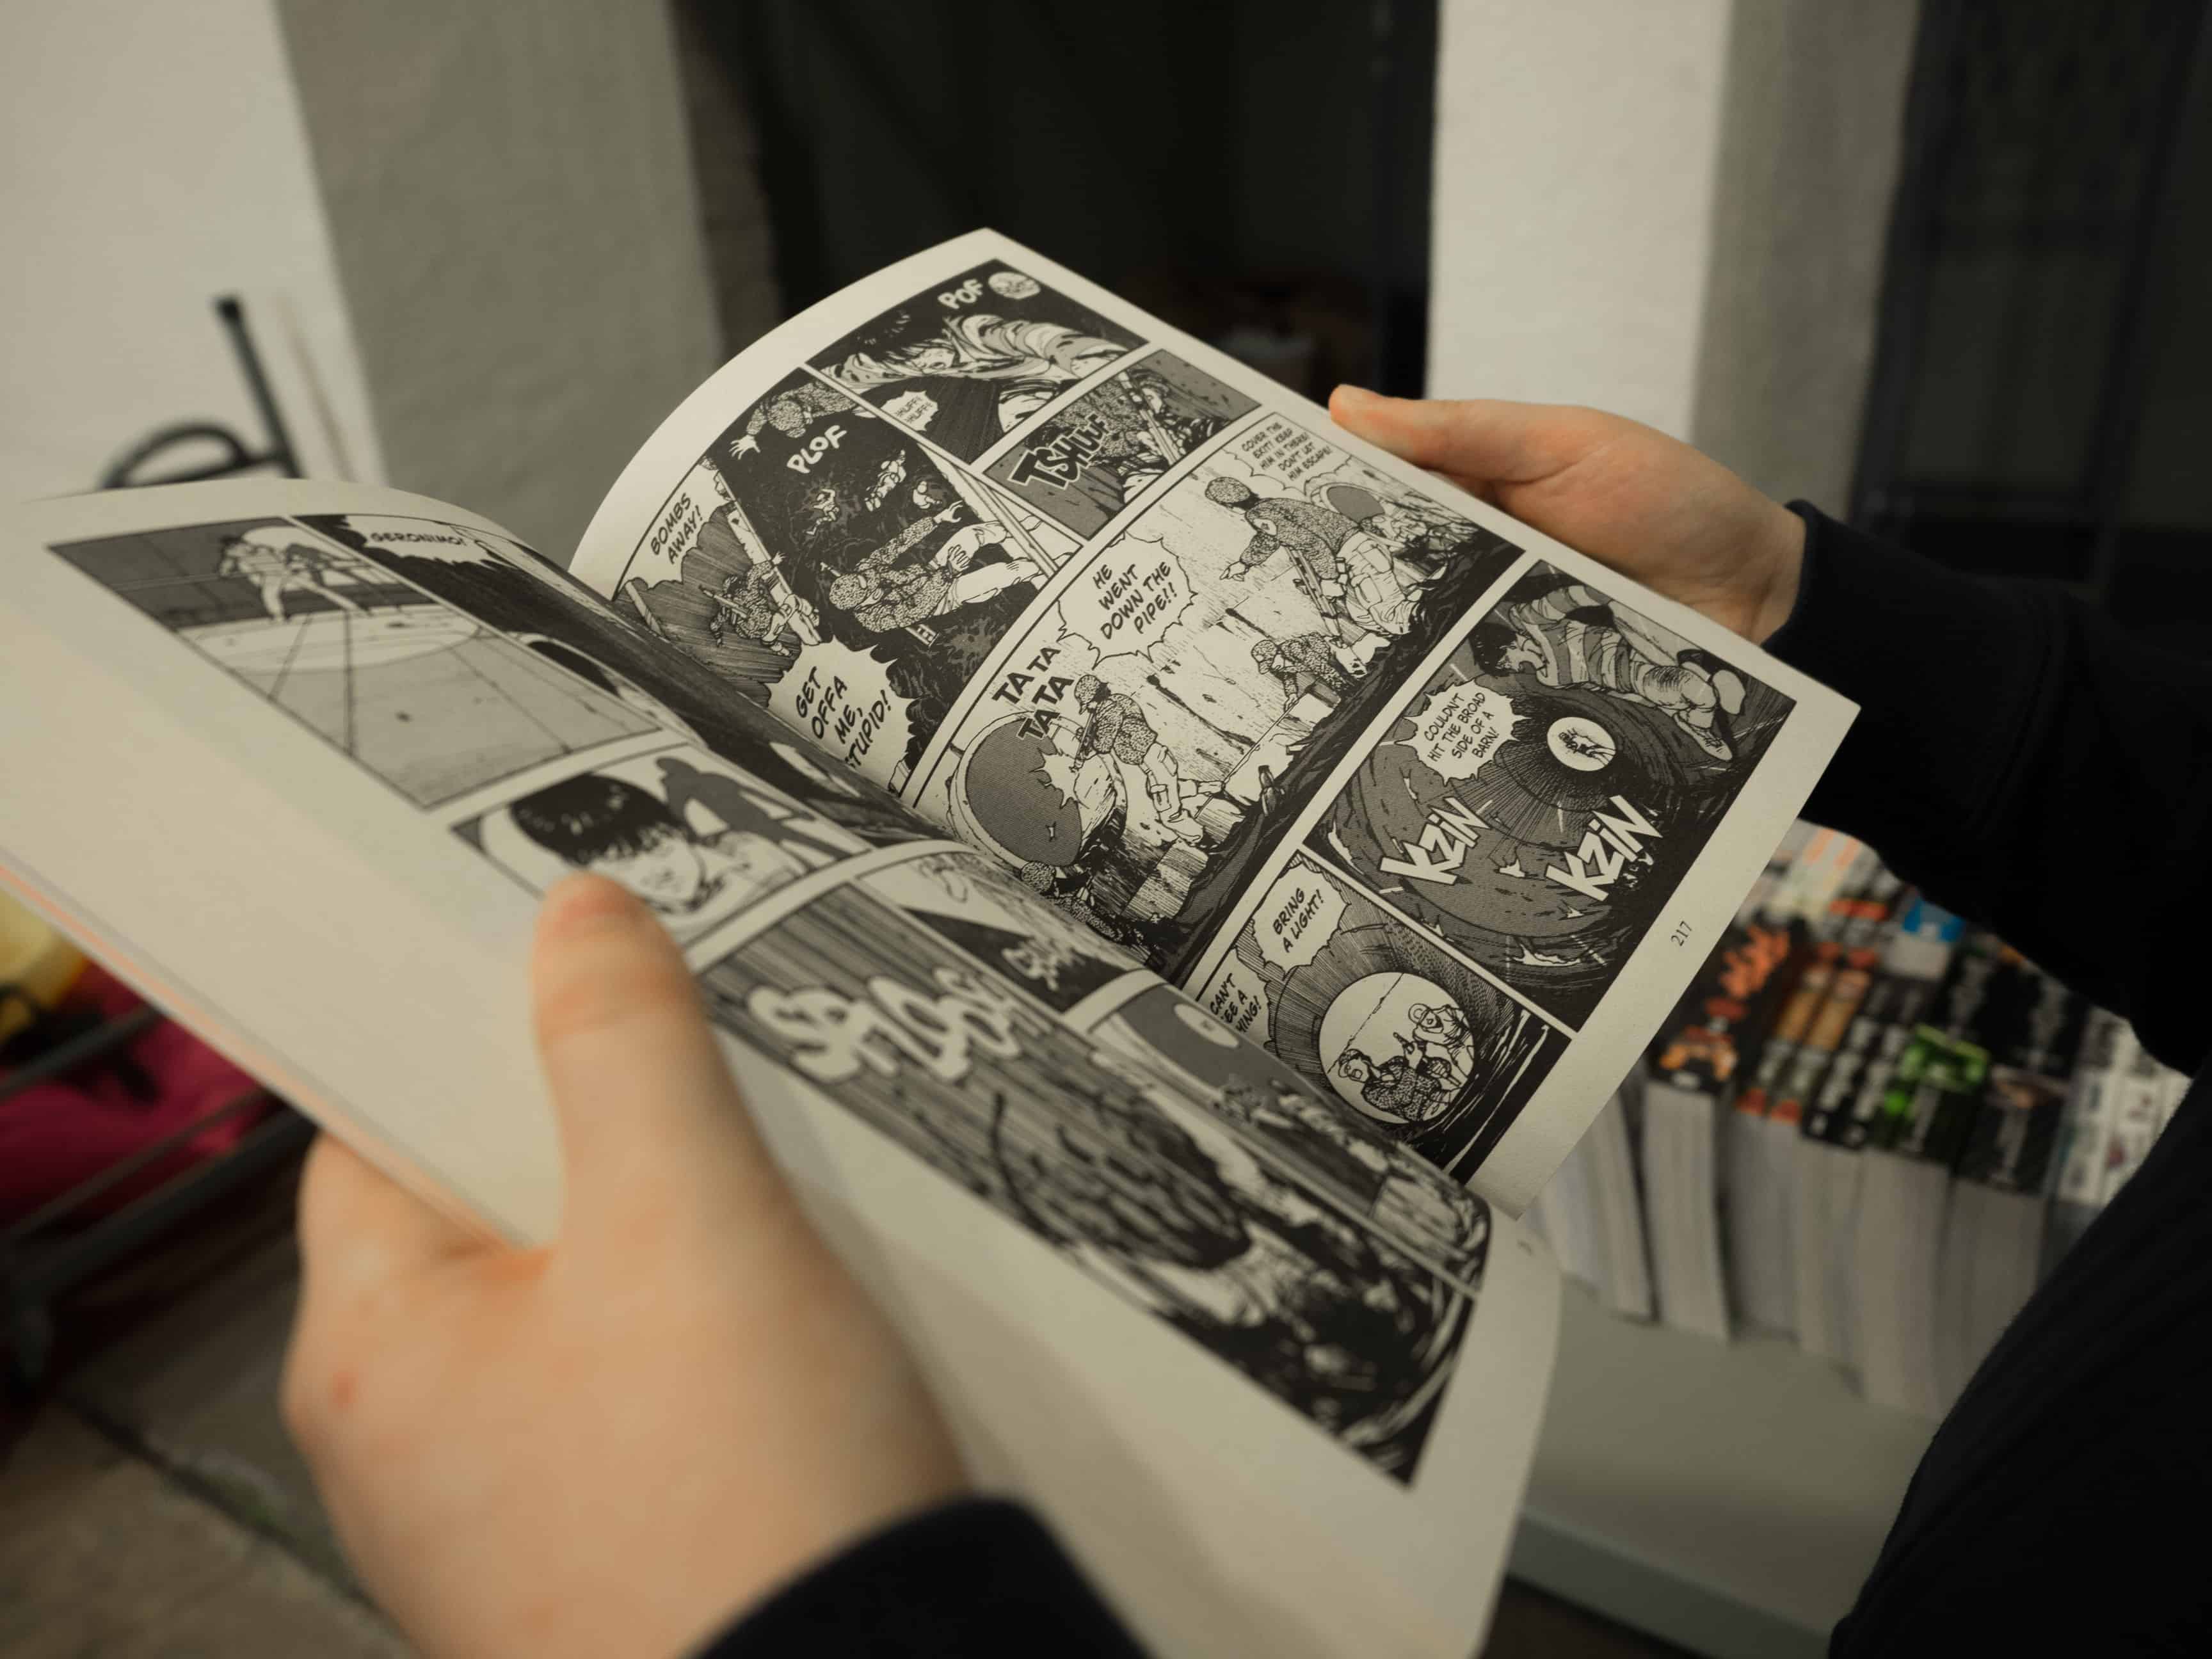 How to Make Comics: What Are the Elements of a Comic?, Magazine